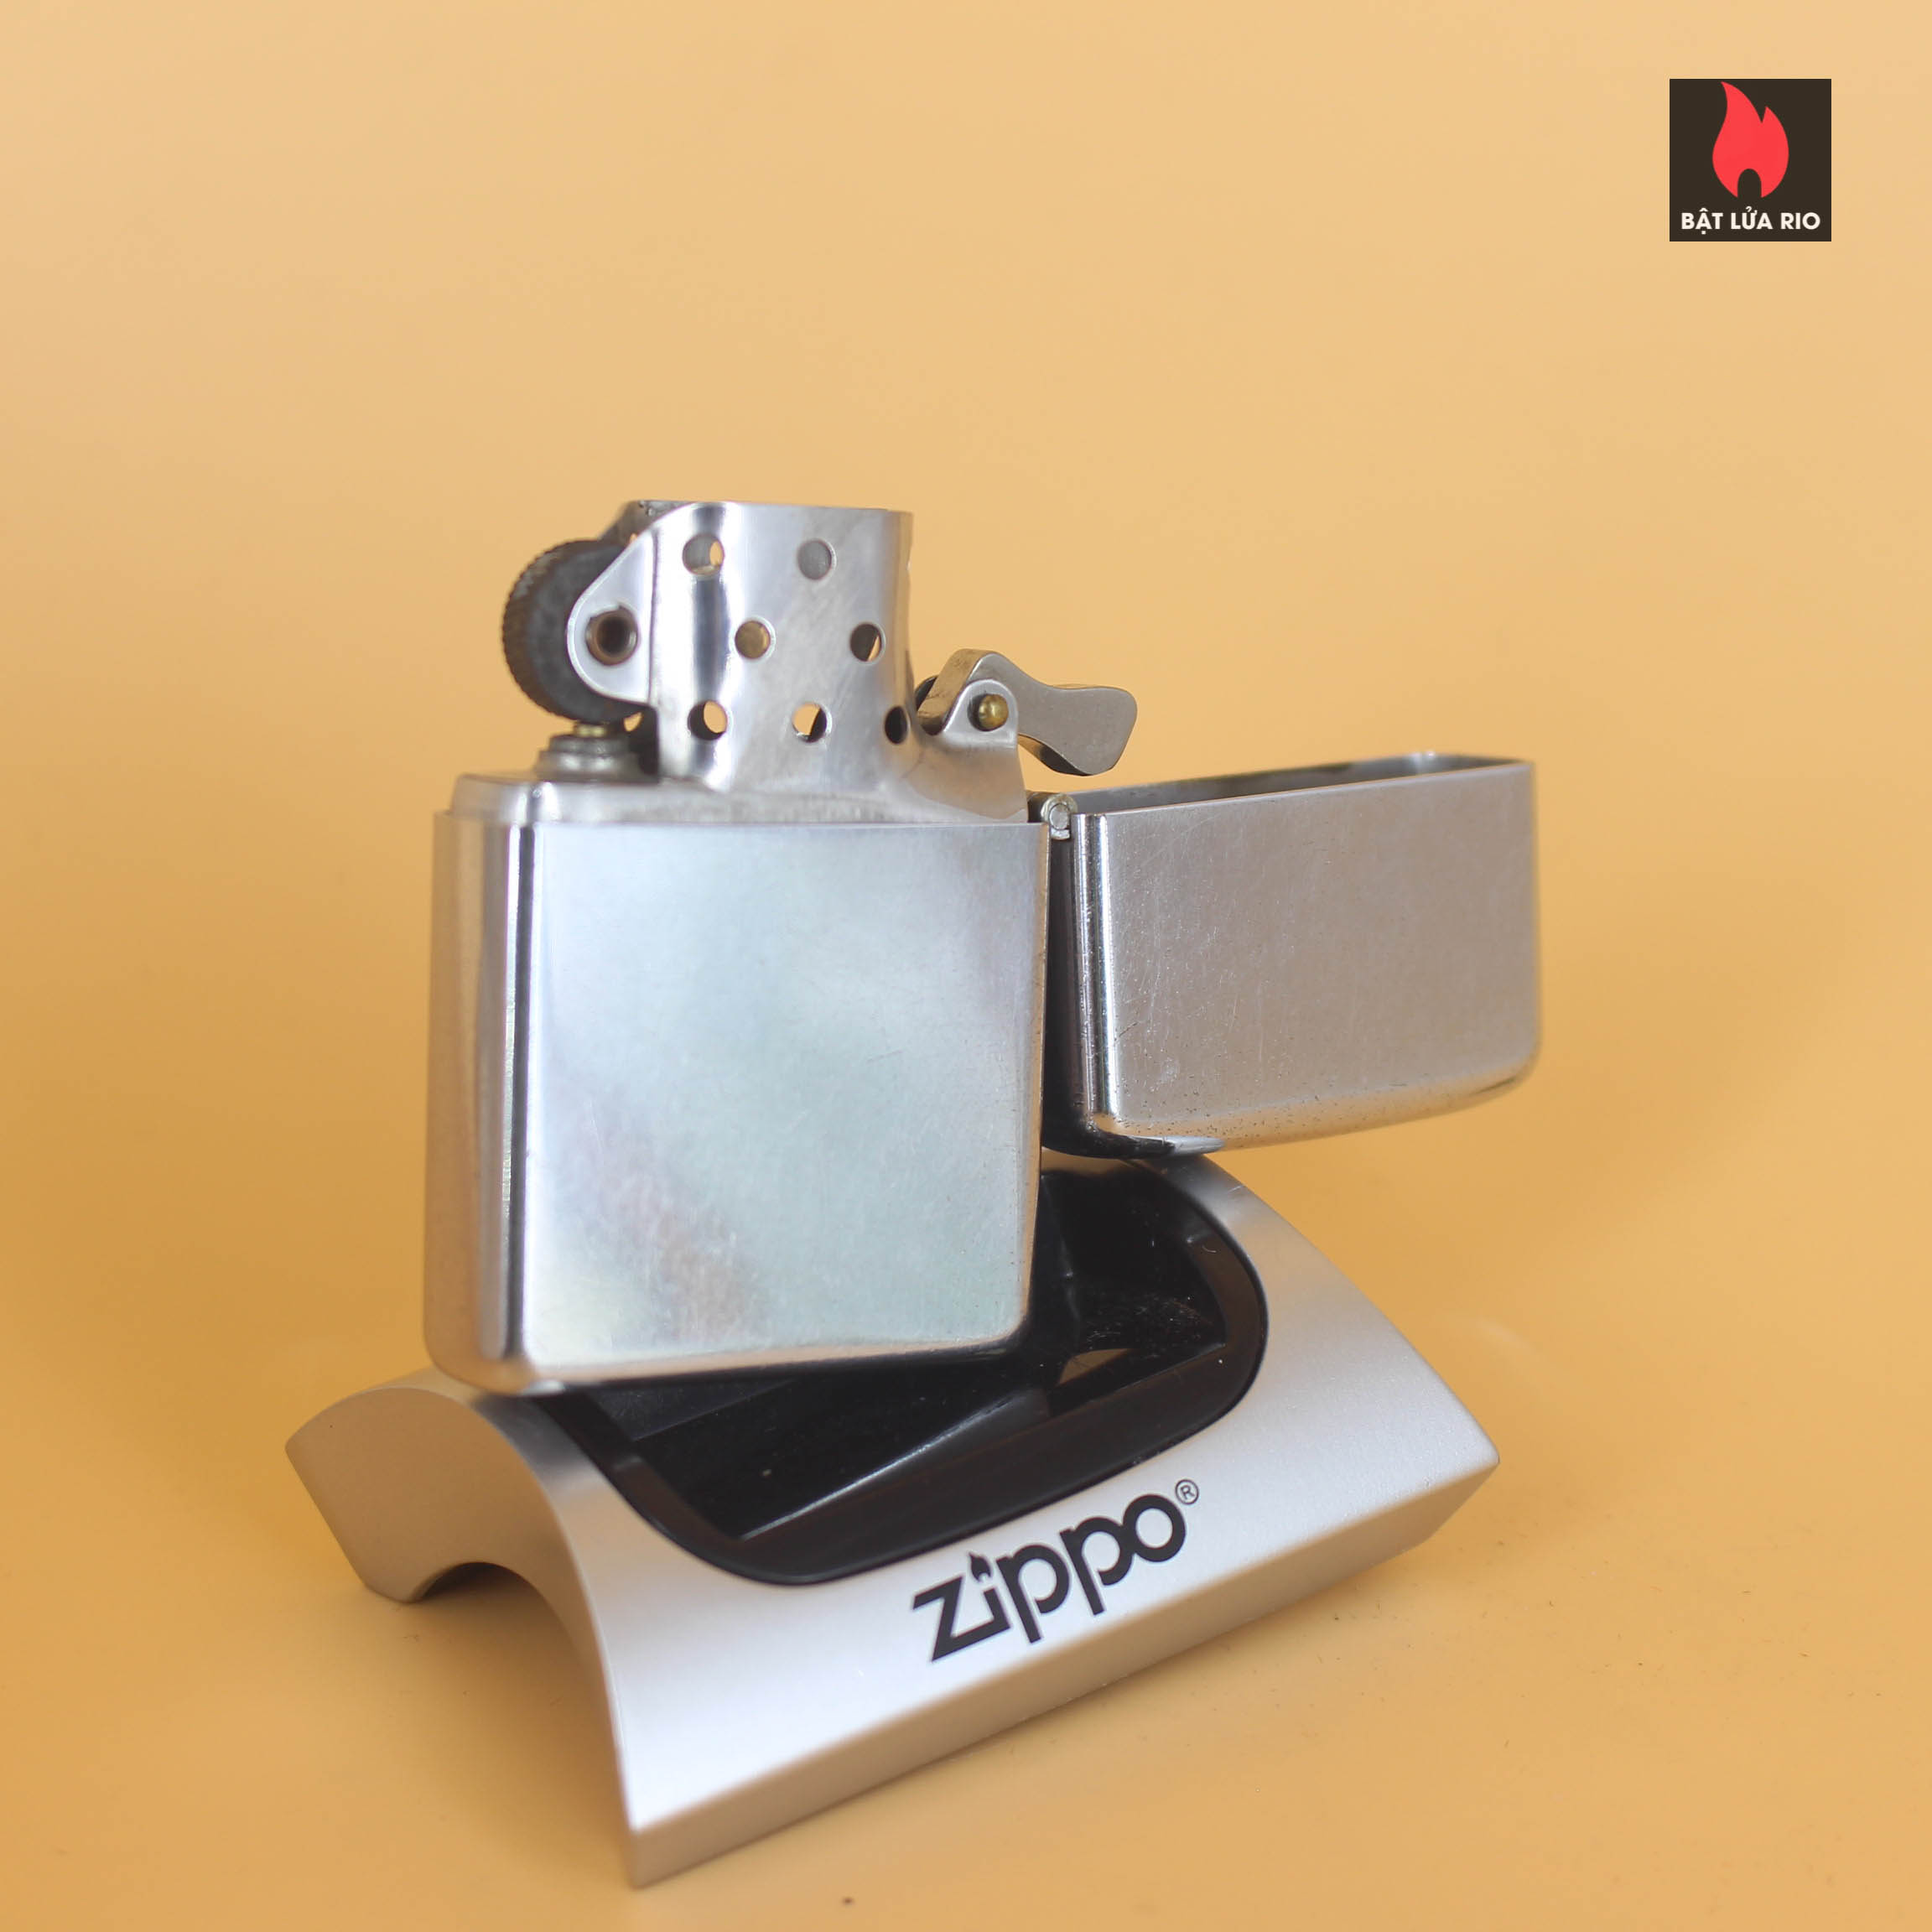 Zippo Xưa 1956 – Zippo lighter given to John L.Denti by Bill Holden - Star Of The Movie Toward the Unknown 10